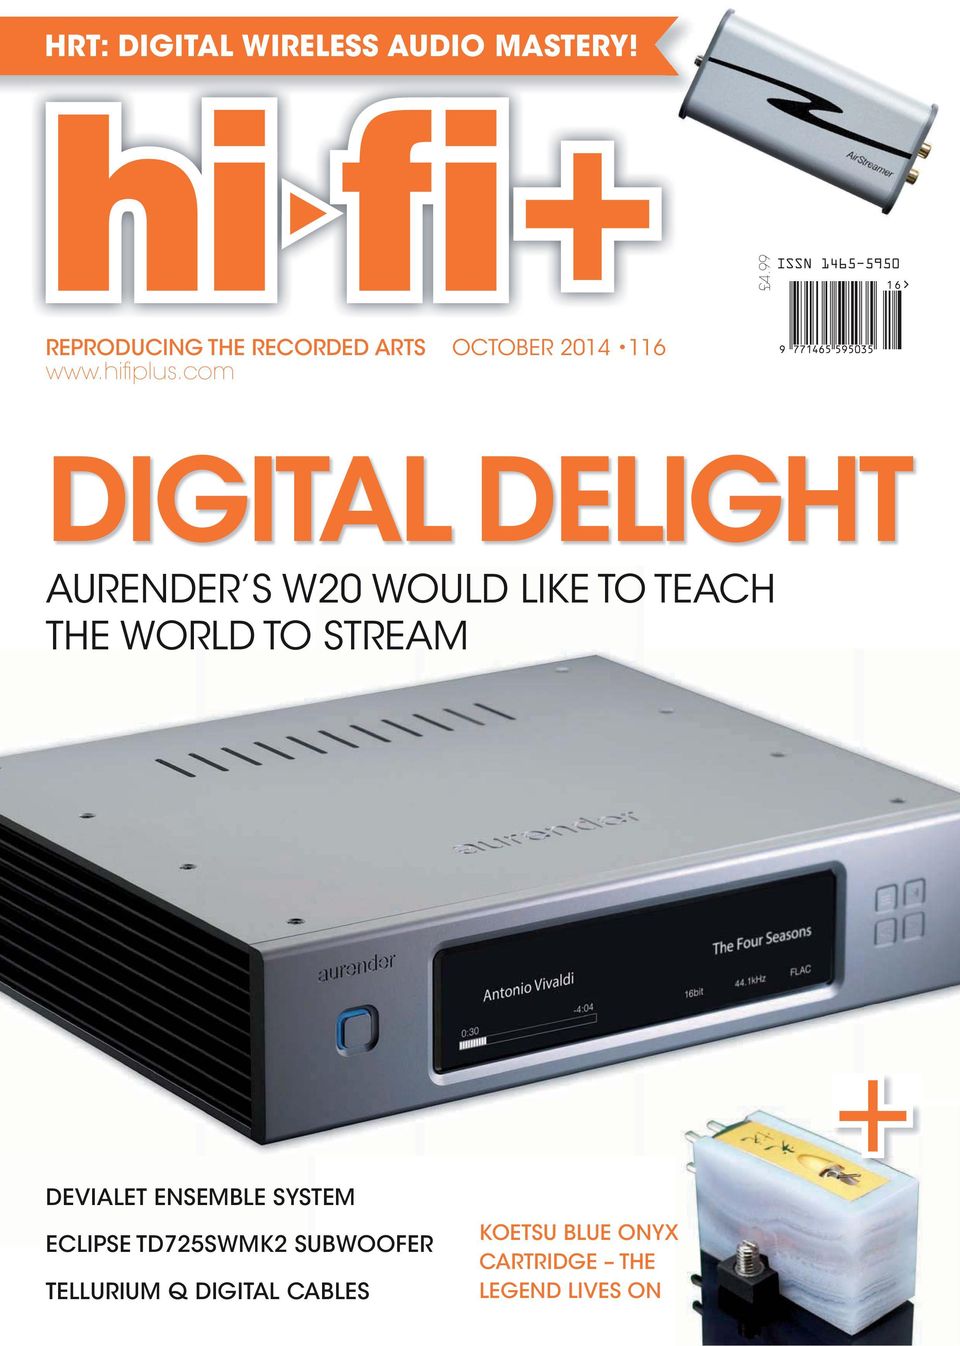 com DIGITAL DELIGHT AURENDER S W20 WOULD LIKE TO TEACH THE WORLD TO STREAM